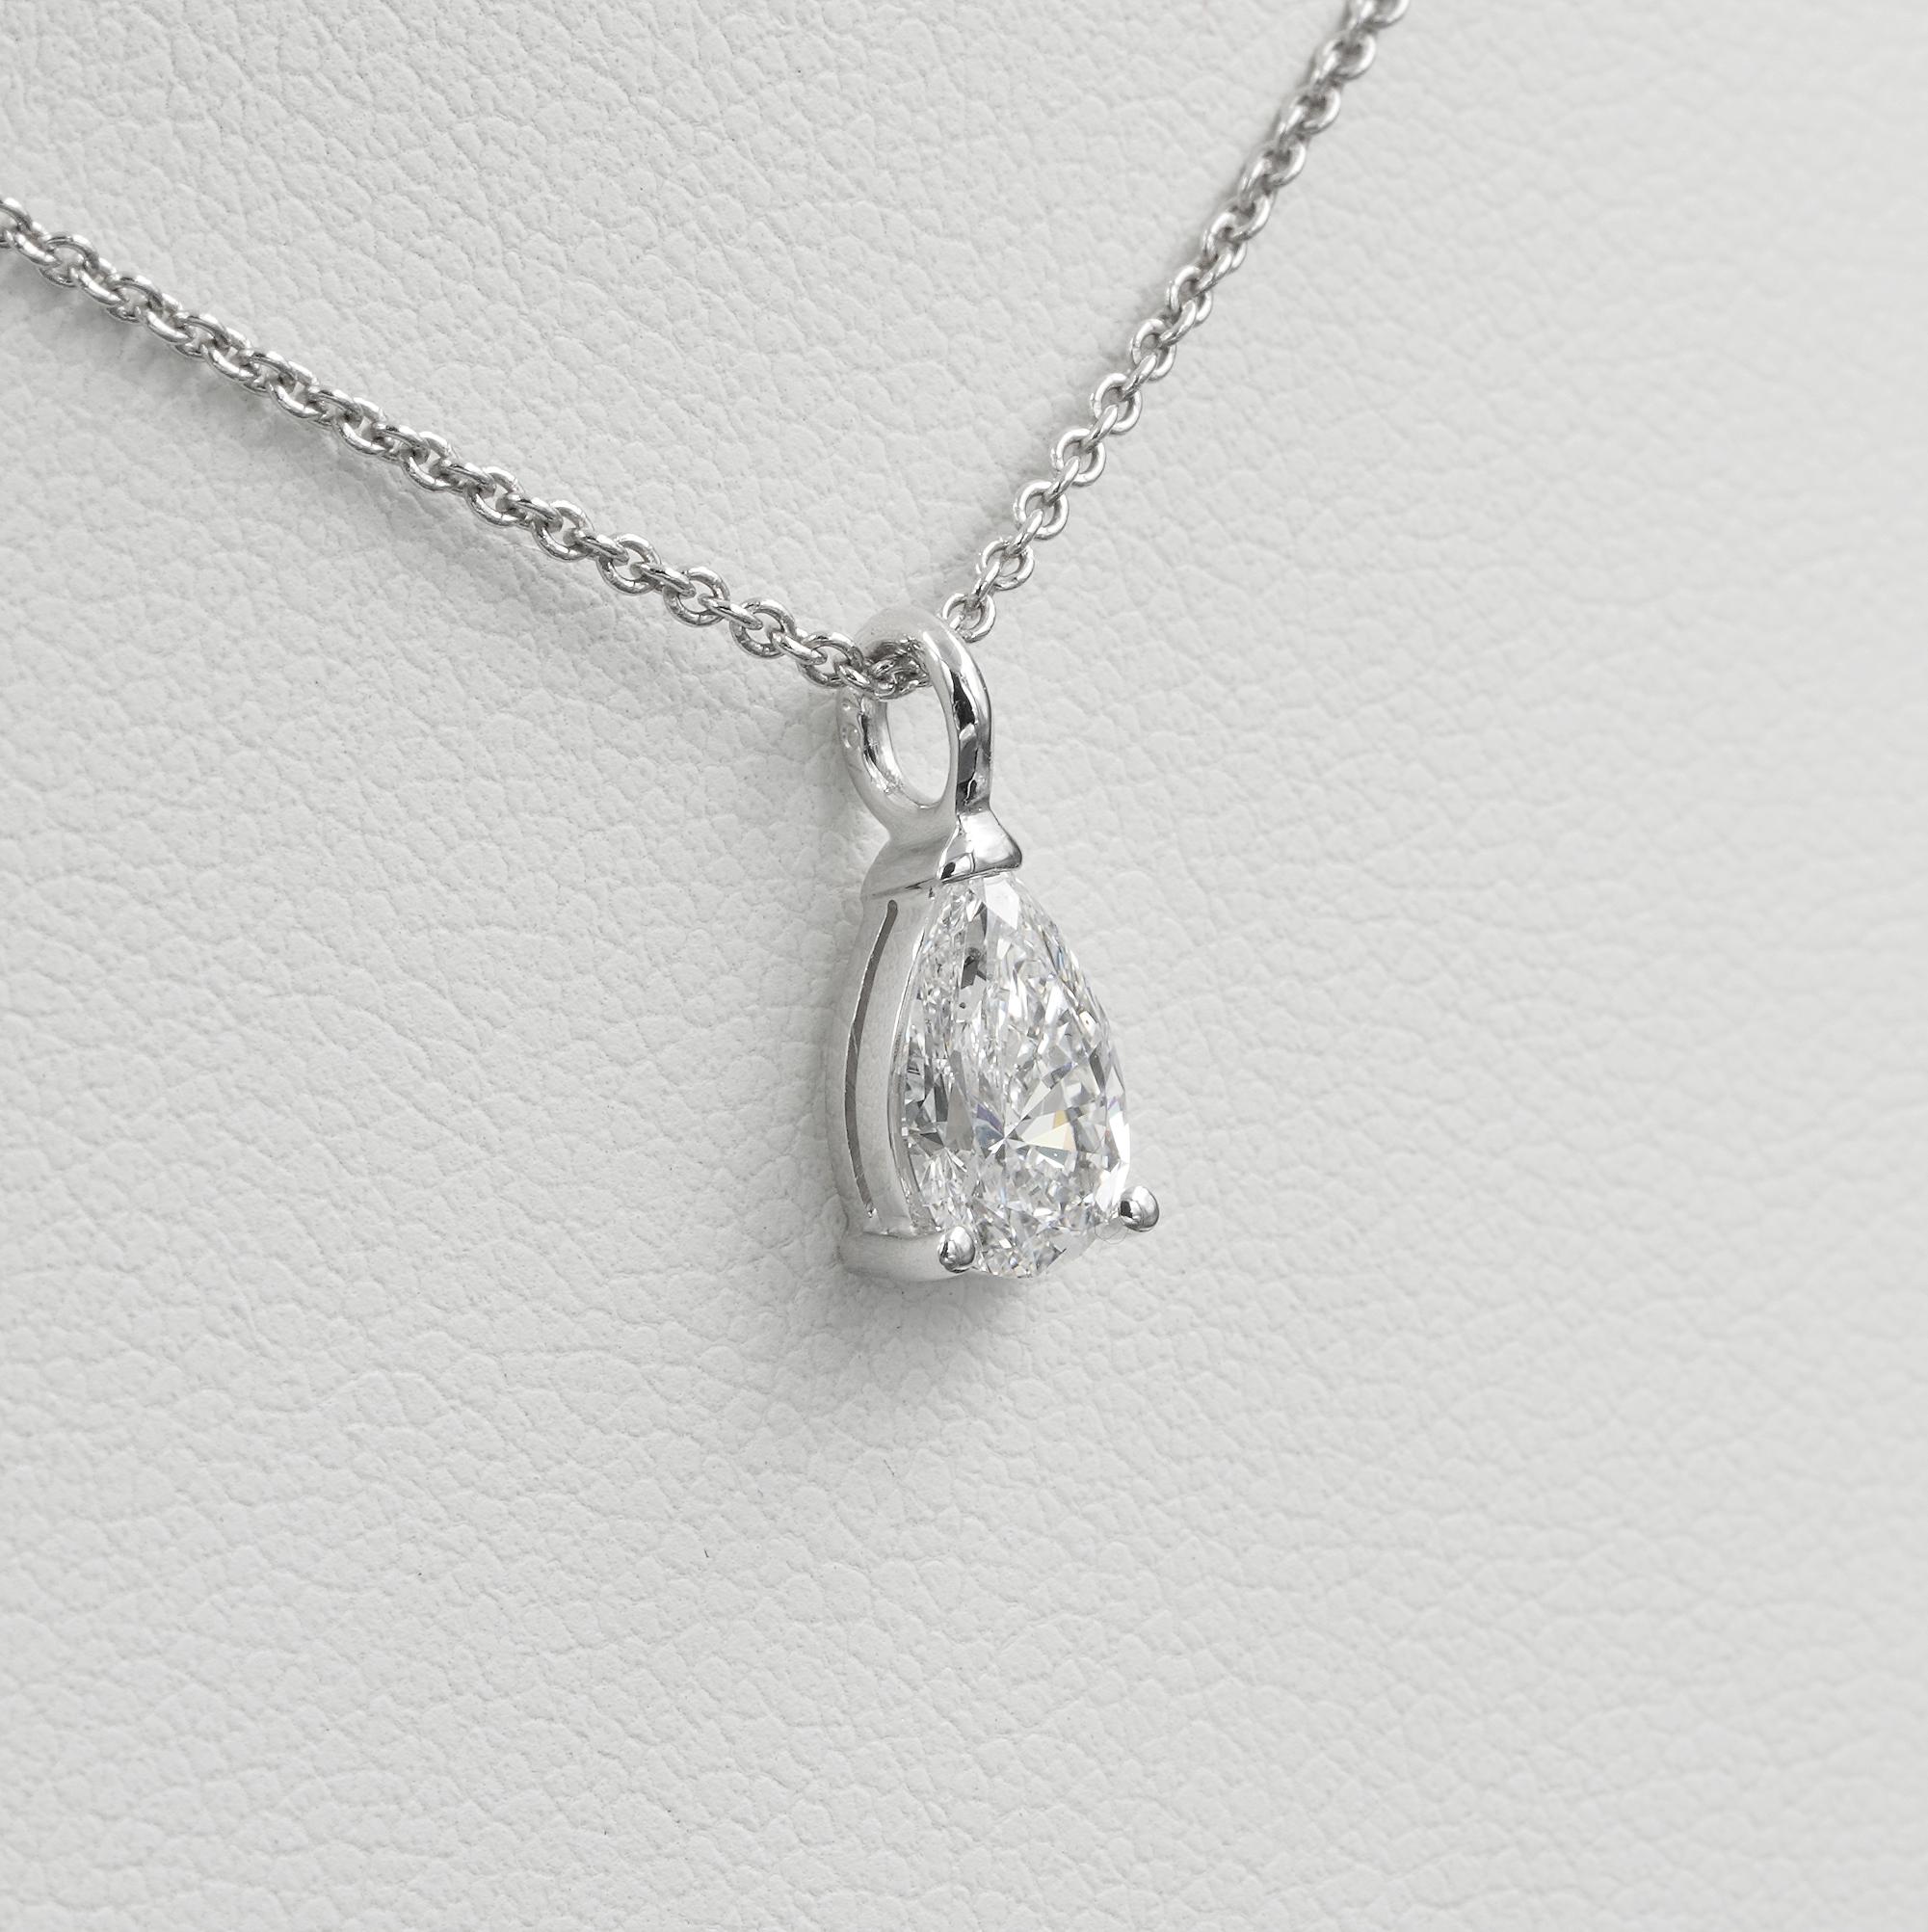 From Dawn to Sunset
Elegant, classy, always with you, from dawn to sunset, bright white, glowing with sparkle, a superb Diamond in Tear Drop shape catching the attention for its elegant shape
100% Natural untreated Diamond Pear cut, weighted off